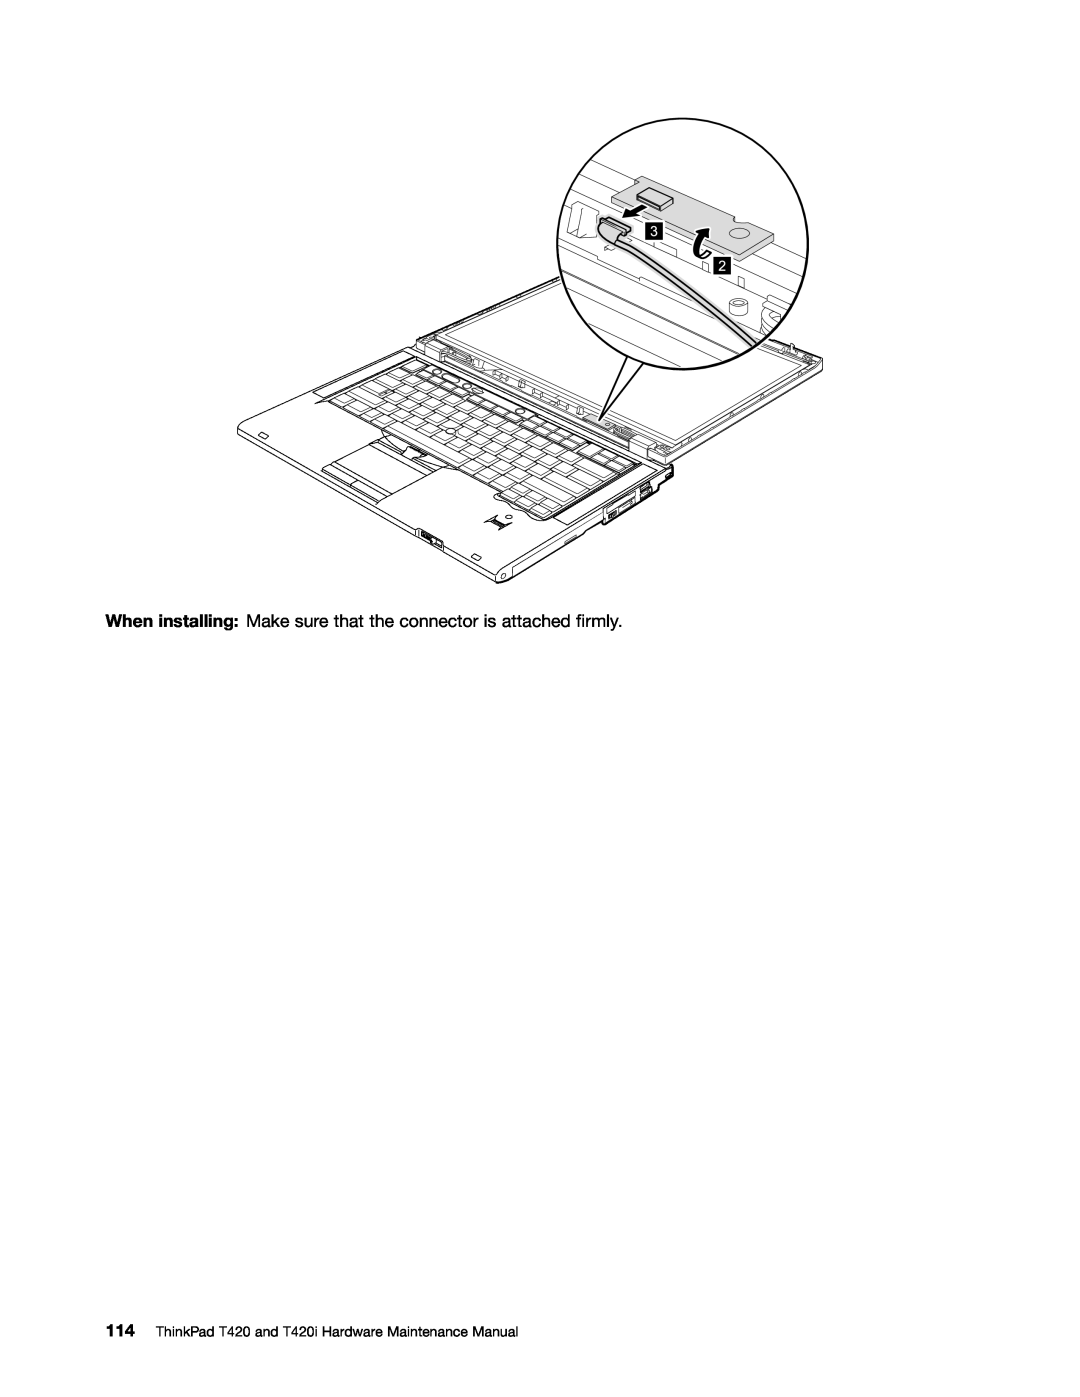 Lenovo T420i manual When installing Make sure that the connector is attached firmly 